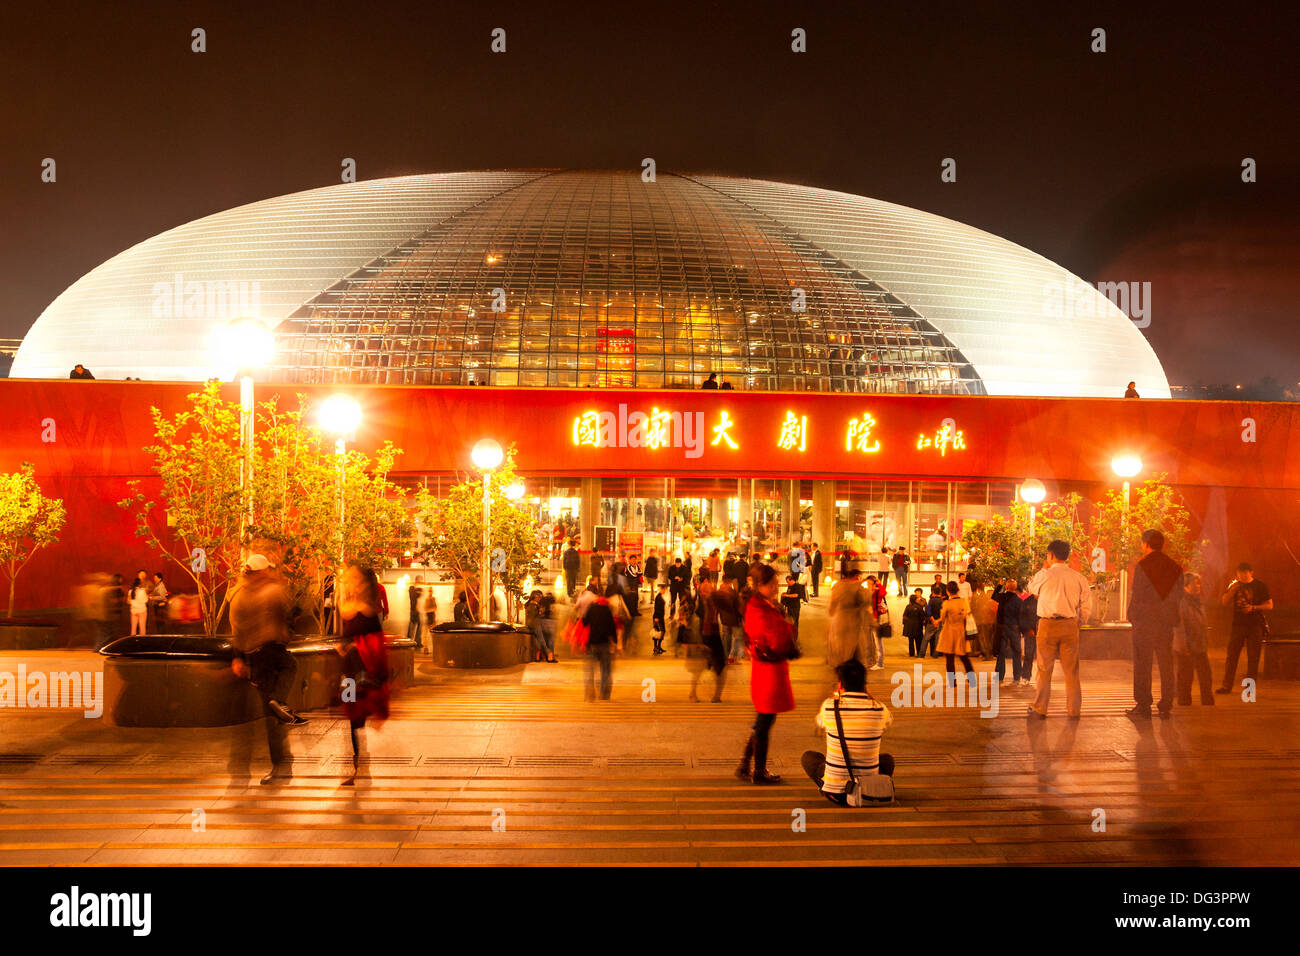 National Theatre lit up at night during National Day Festival, Beijing, China, Asia Stock Photo